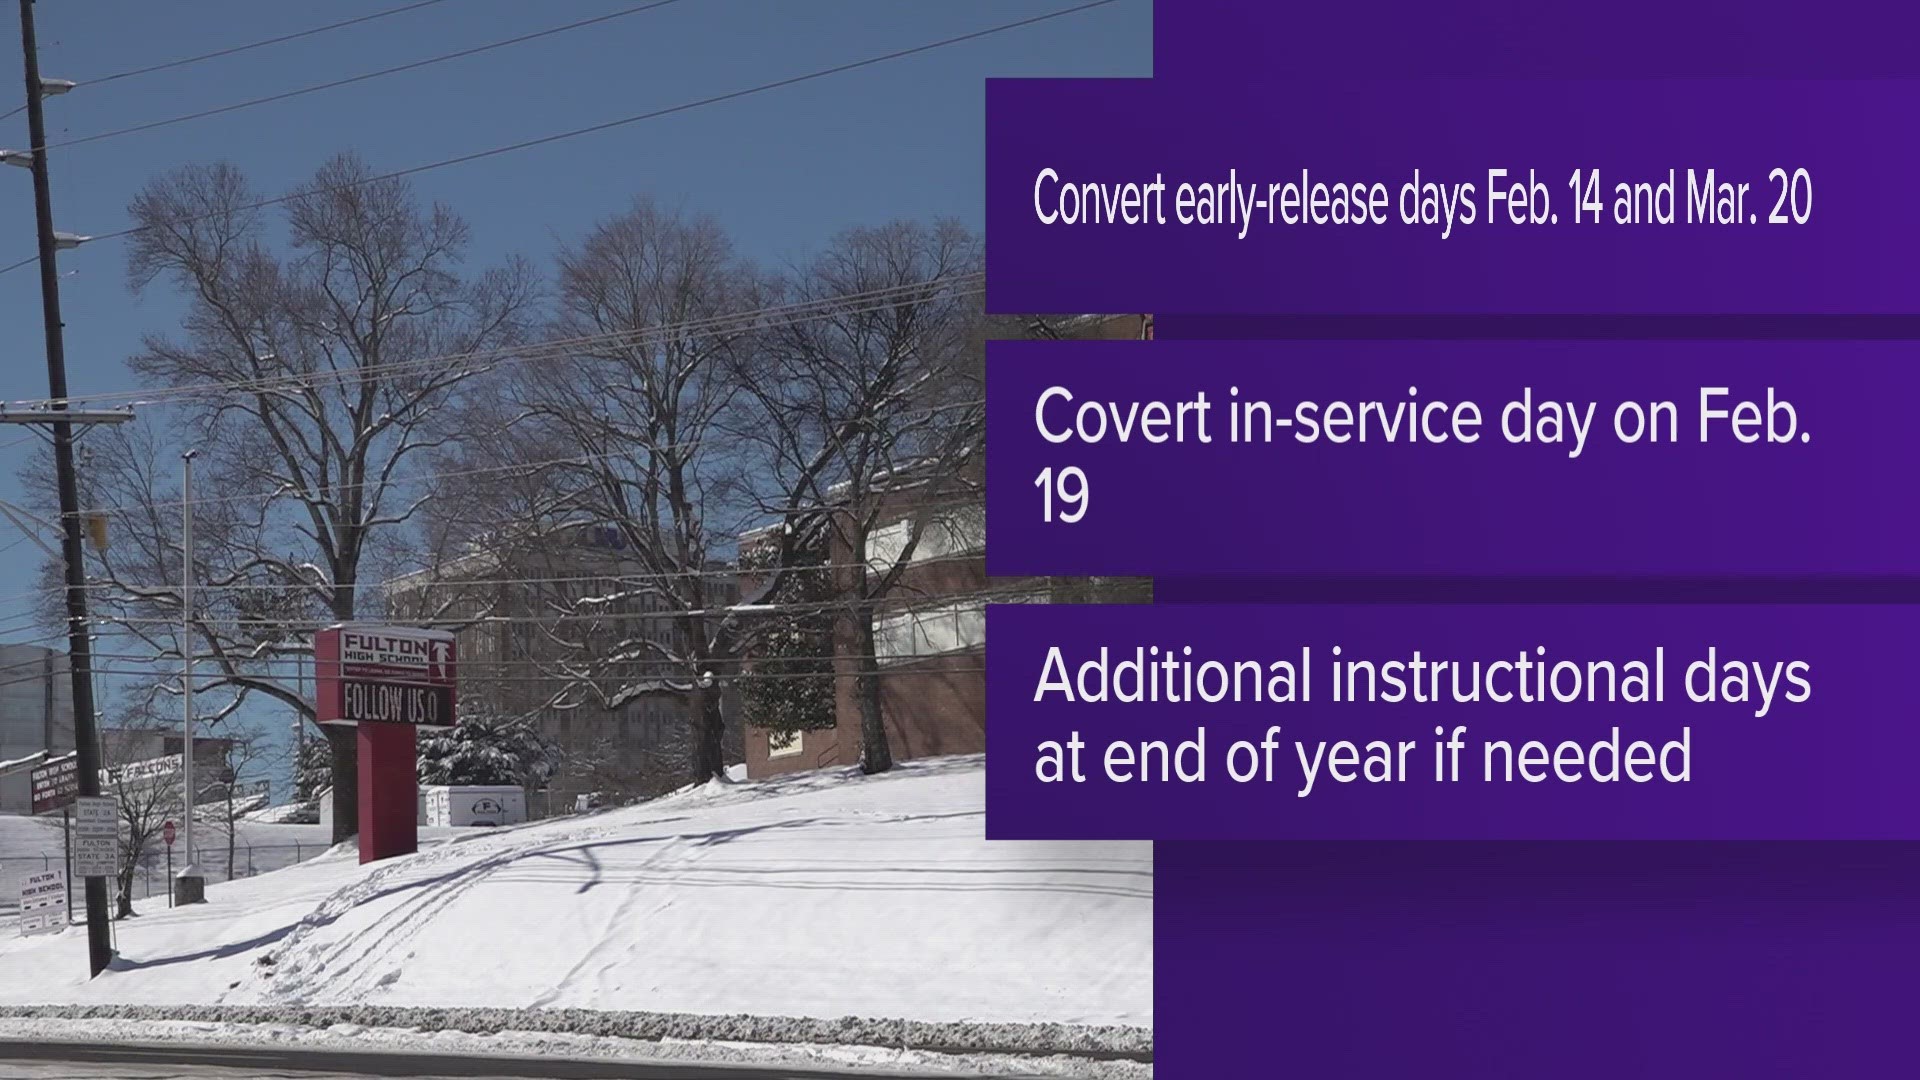 Leaders discussed converting early release days into an additional inclement weather day and converting an in-service day to provide an additional day off.